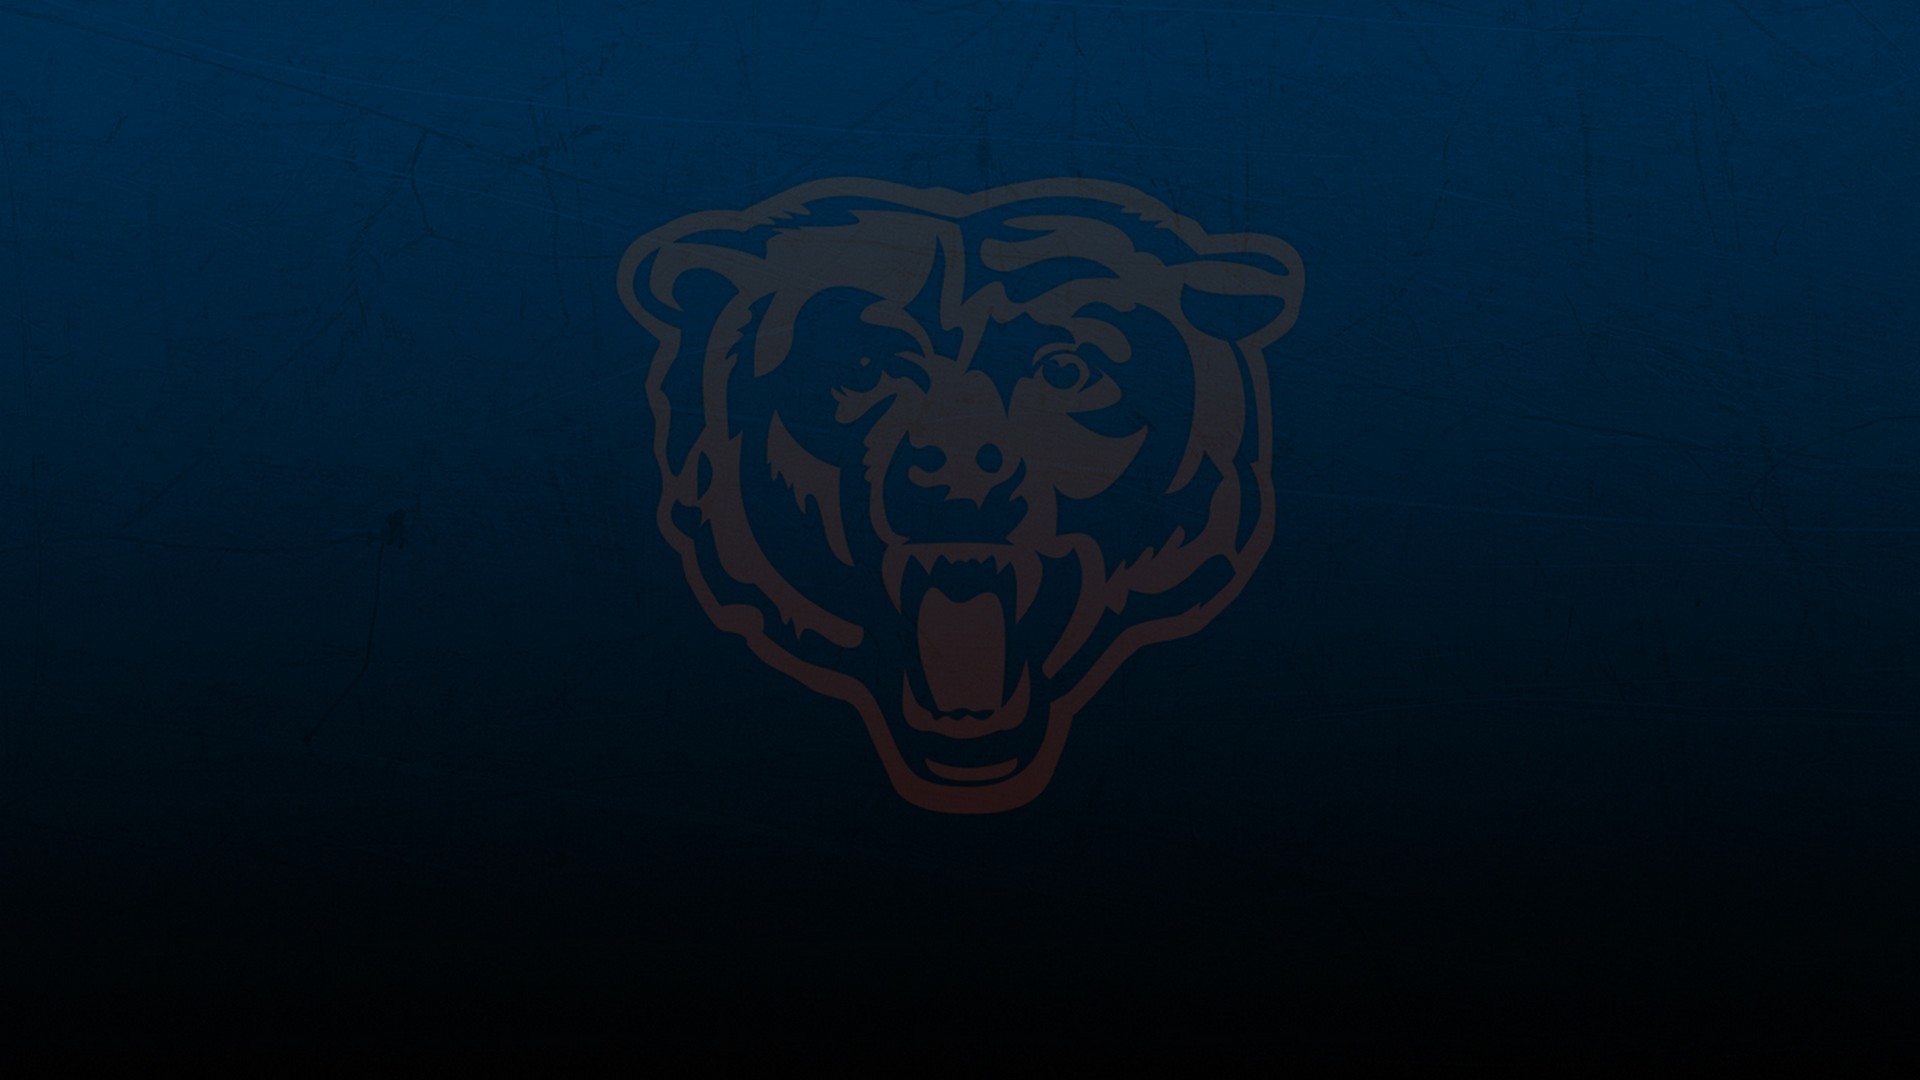 Bears Desktop Wallpaper With high-resolution 1920X1080 pixel. You can use this wallpaper for your Mac or Windows Desktop Background, iPhone, Android or Tablet and another Smartphone device